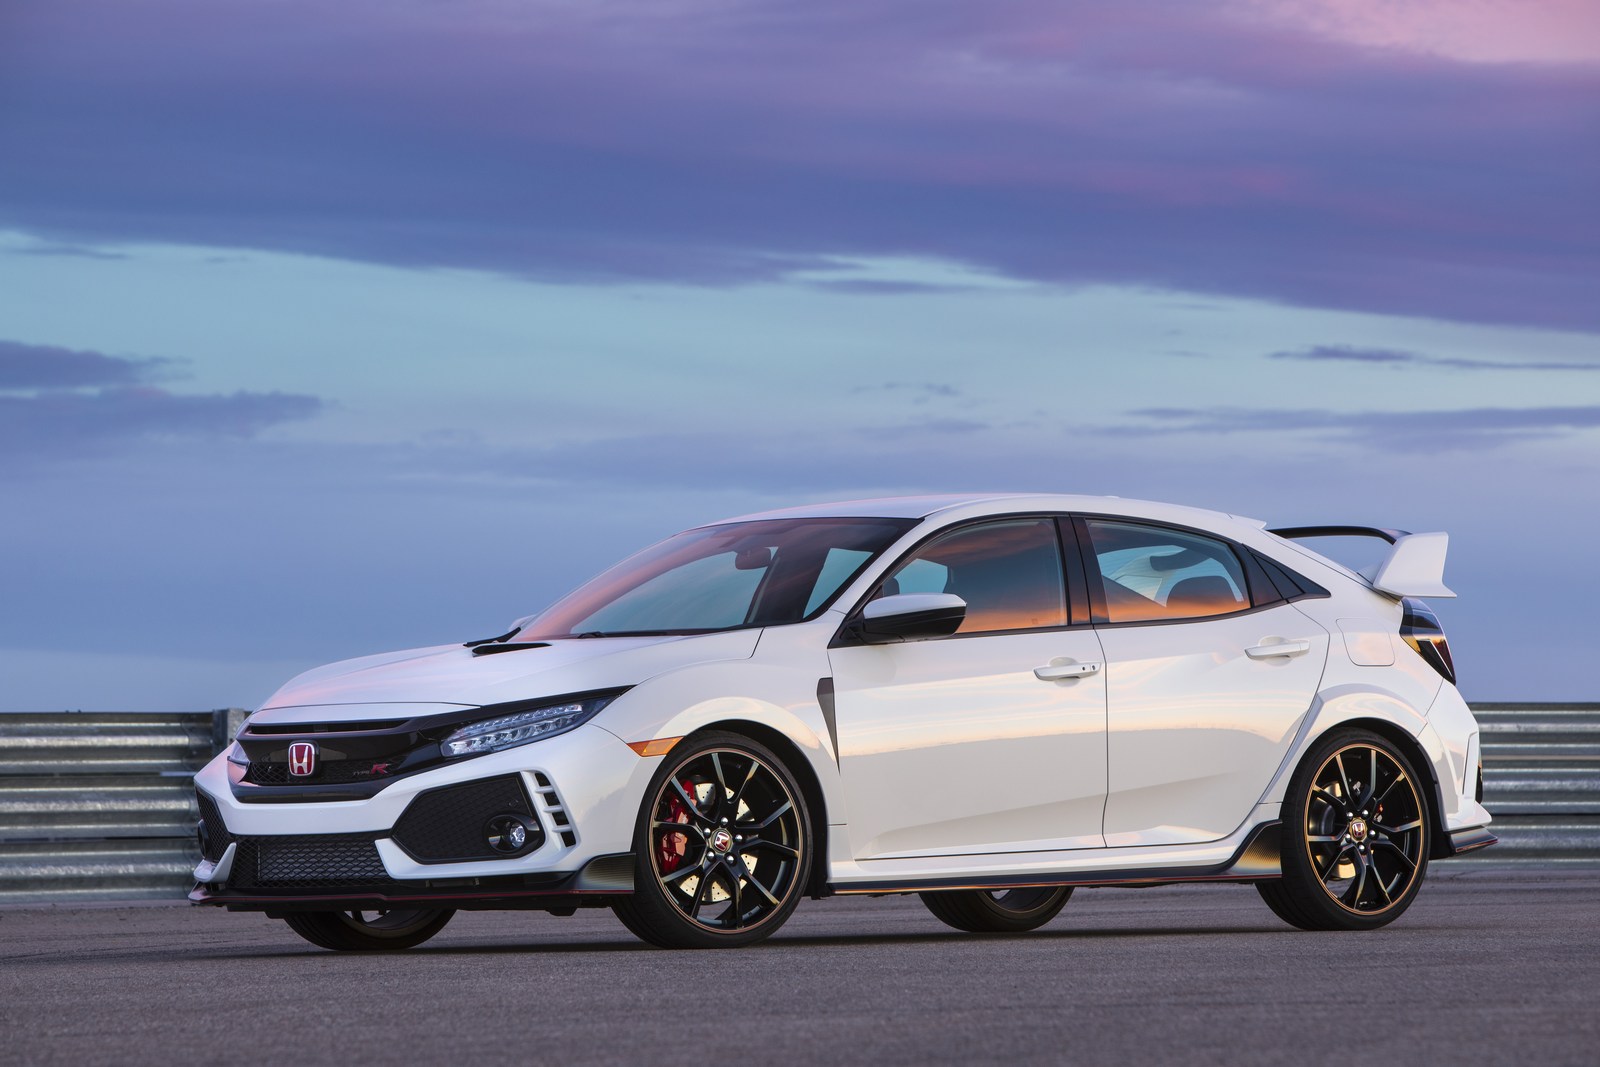 2018 Honda Civic Type R Price Bumped To $34,100, No Entry Level | Carscoops1600 x 1067